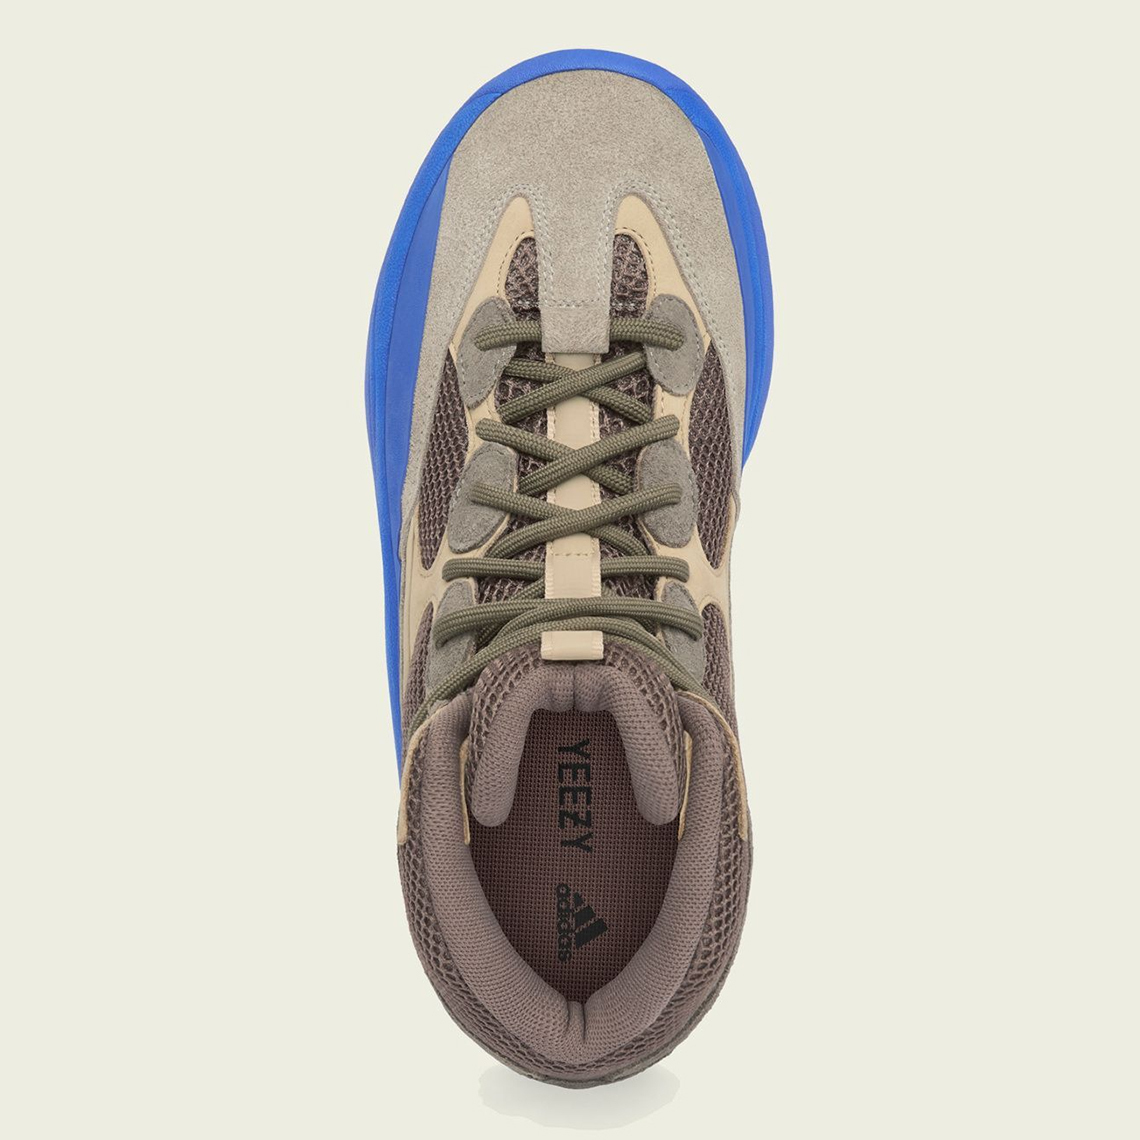 adidas-yeezy-desert-boot-taupe-blue-release-date-2